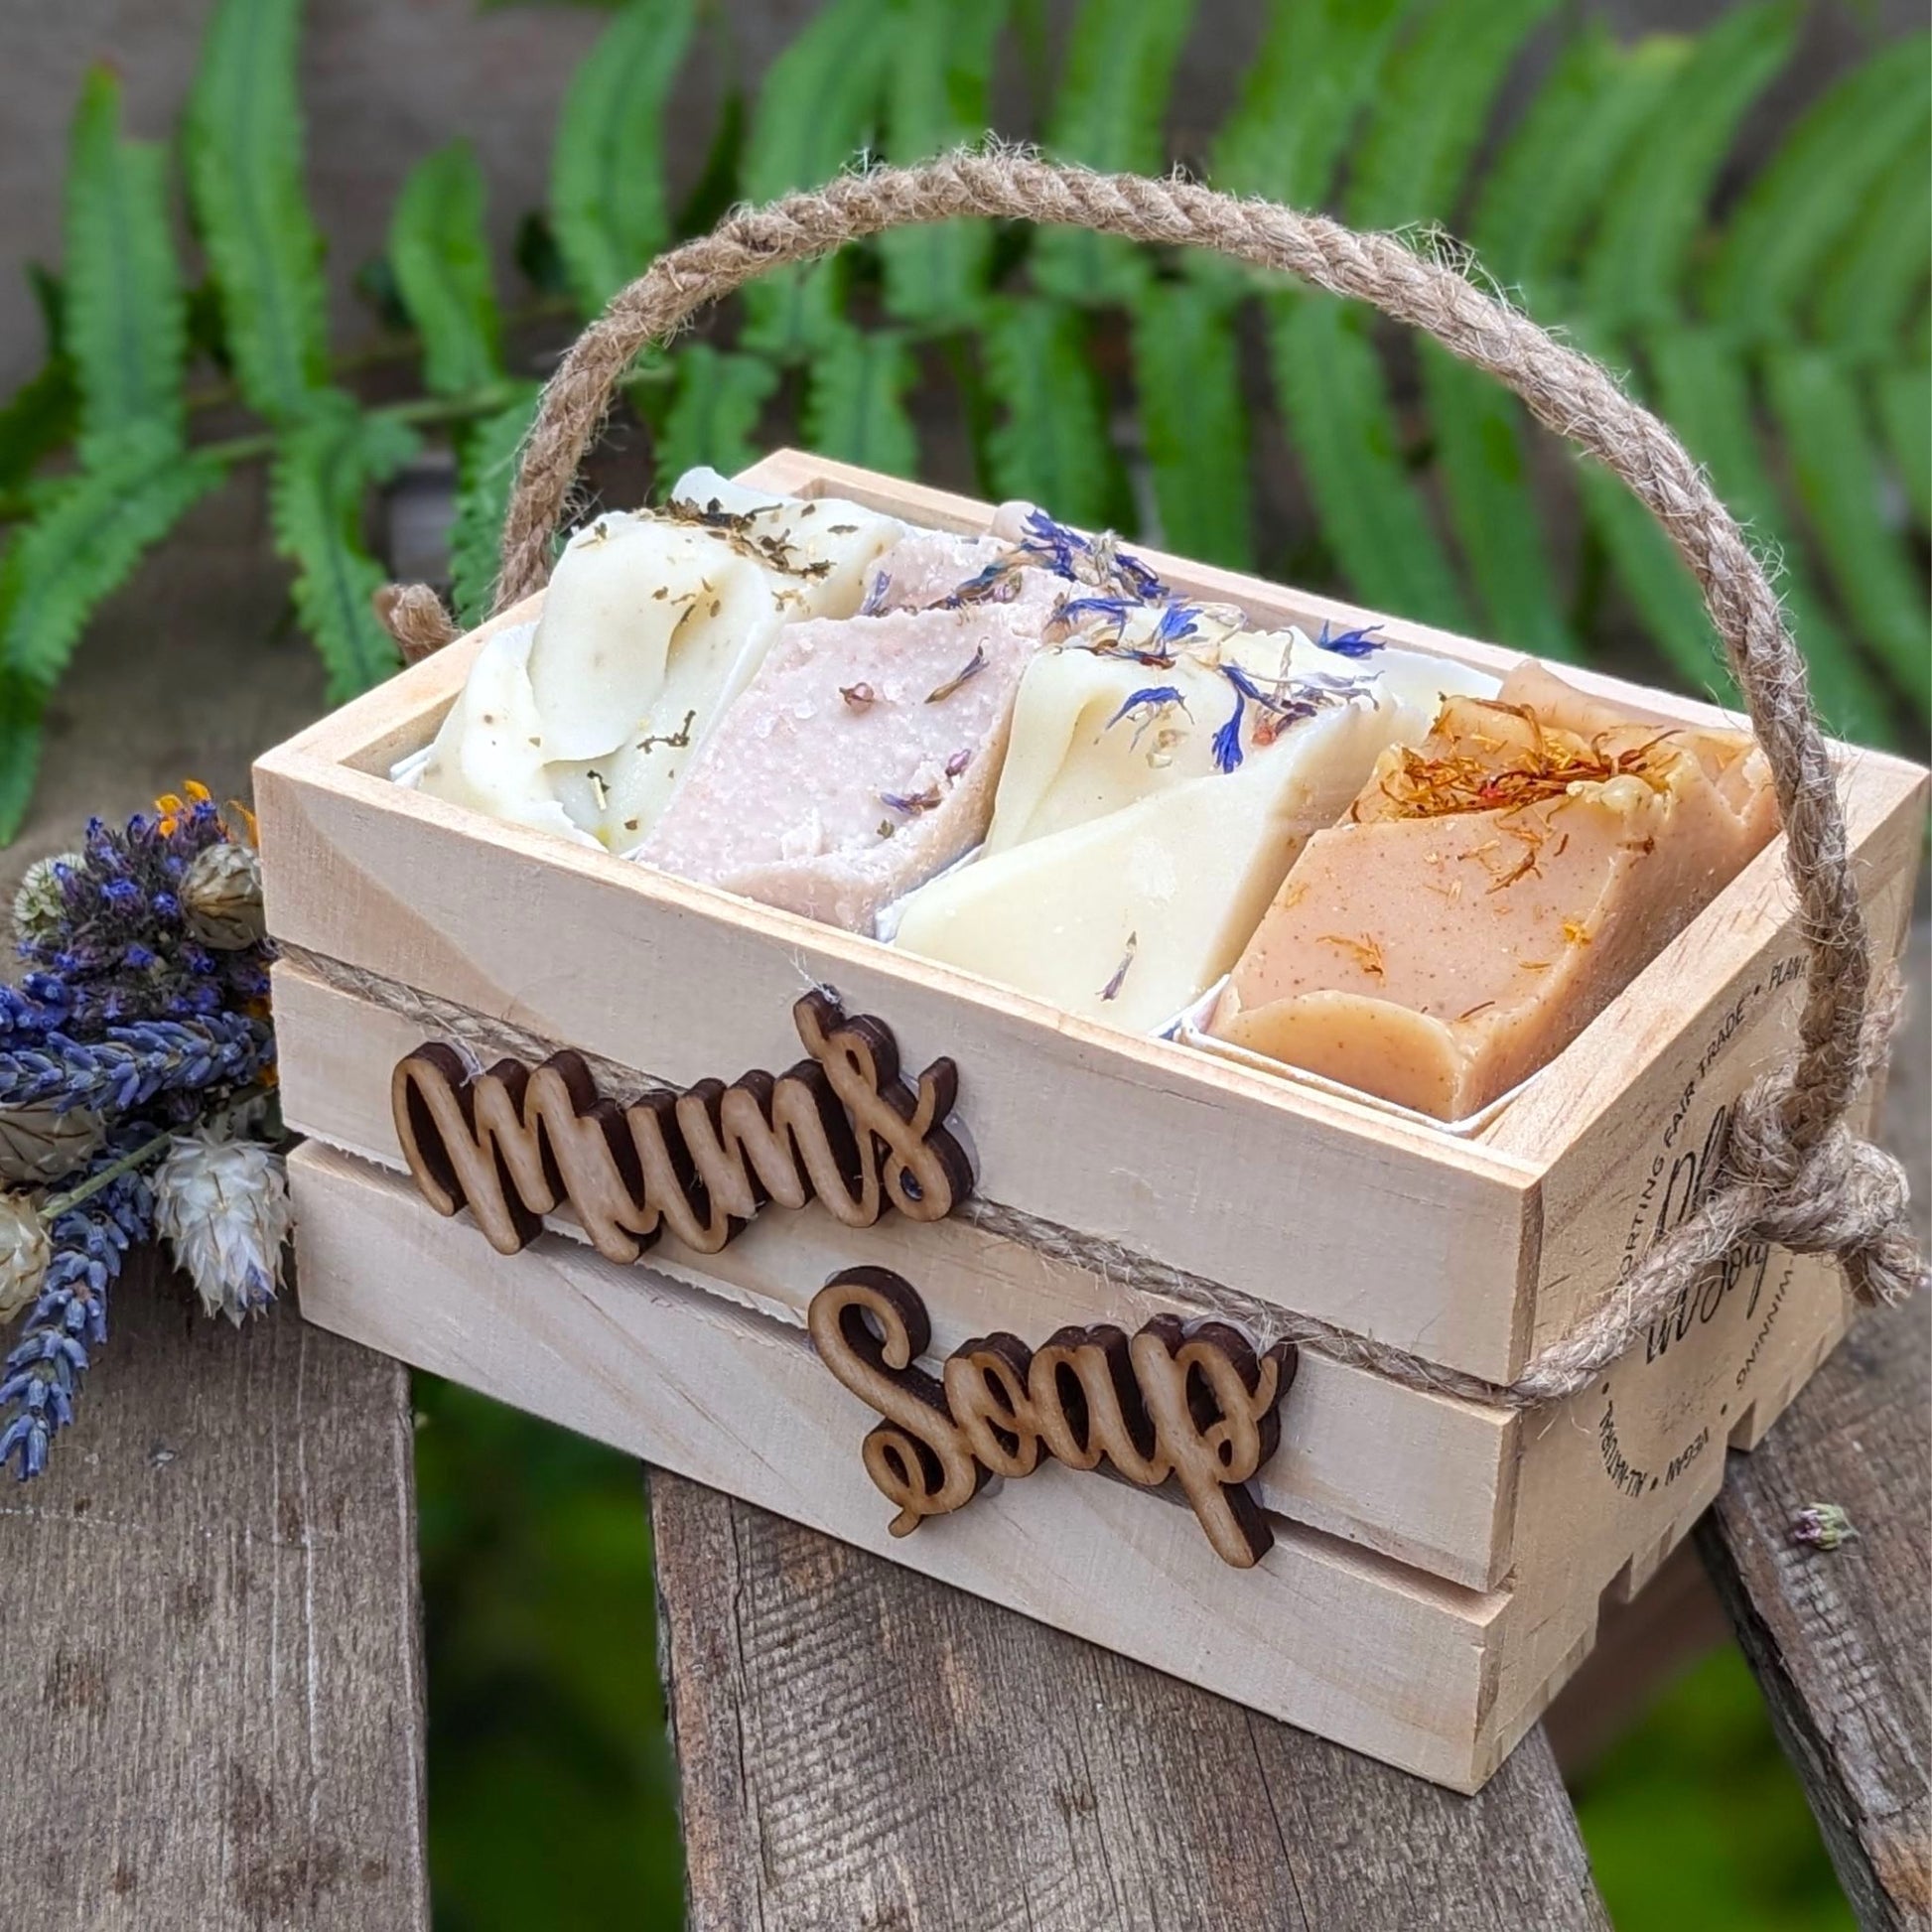 Wooden crate for mum's handmade soap bars